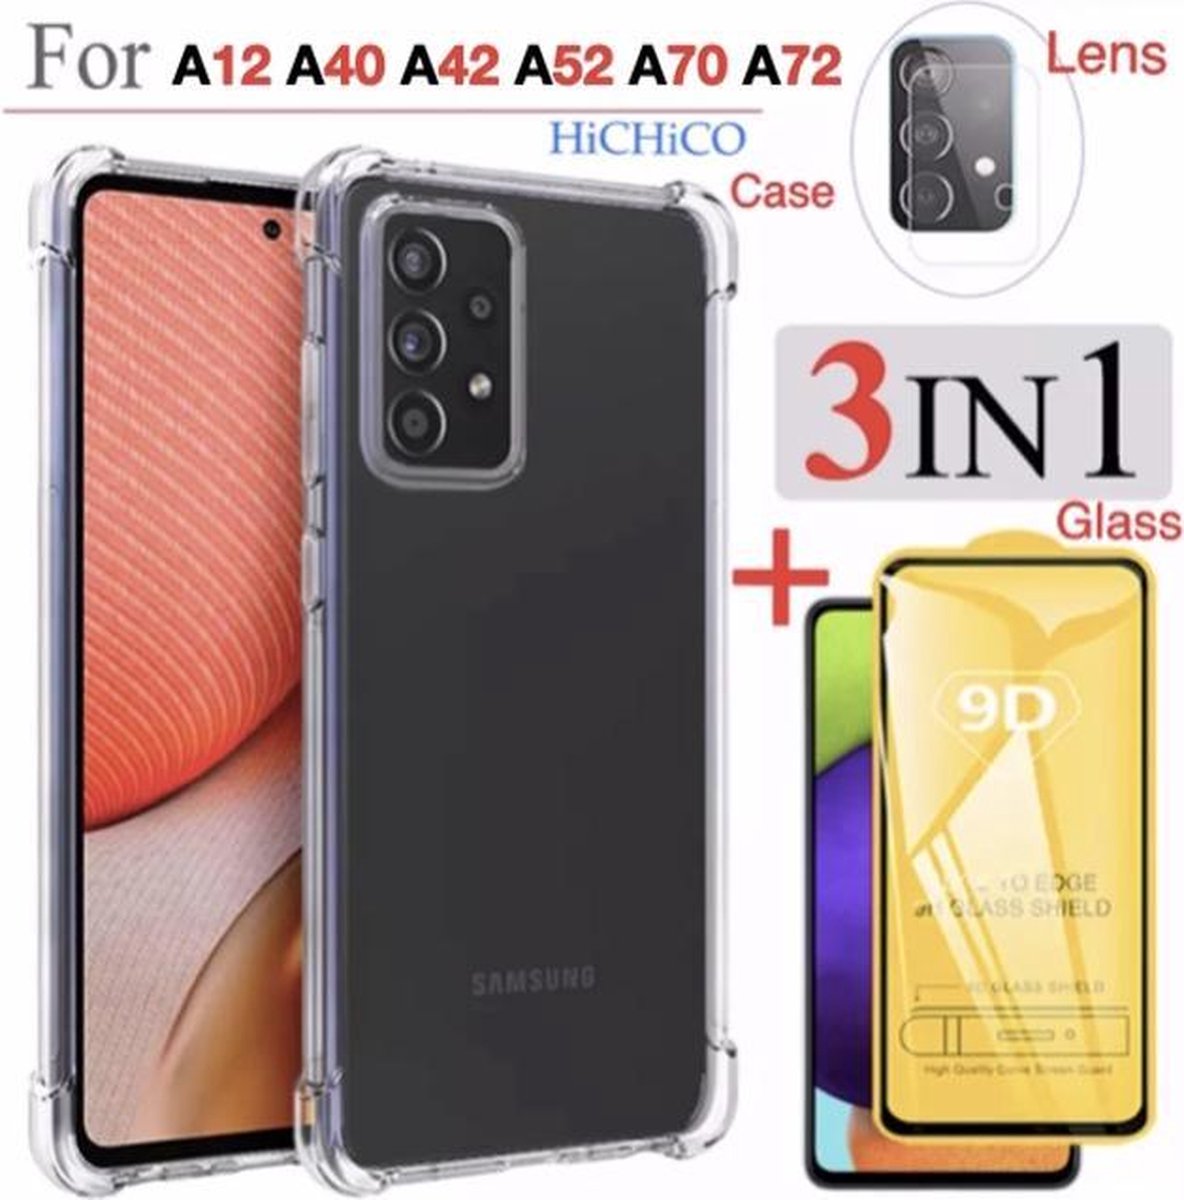 Samsung Galaxy A42 Hoes (Shock Proof Siliconen Case) + Screen protector Tempered Glass ( Full Cower ) + camera lens Glass - Glass - Glazen bescherming 3IN1 van HiCHiCO